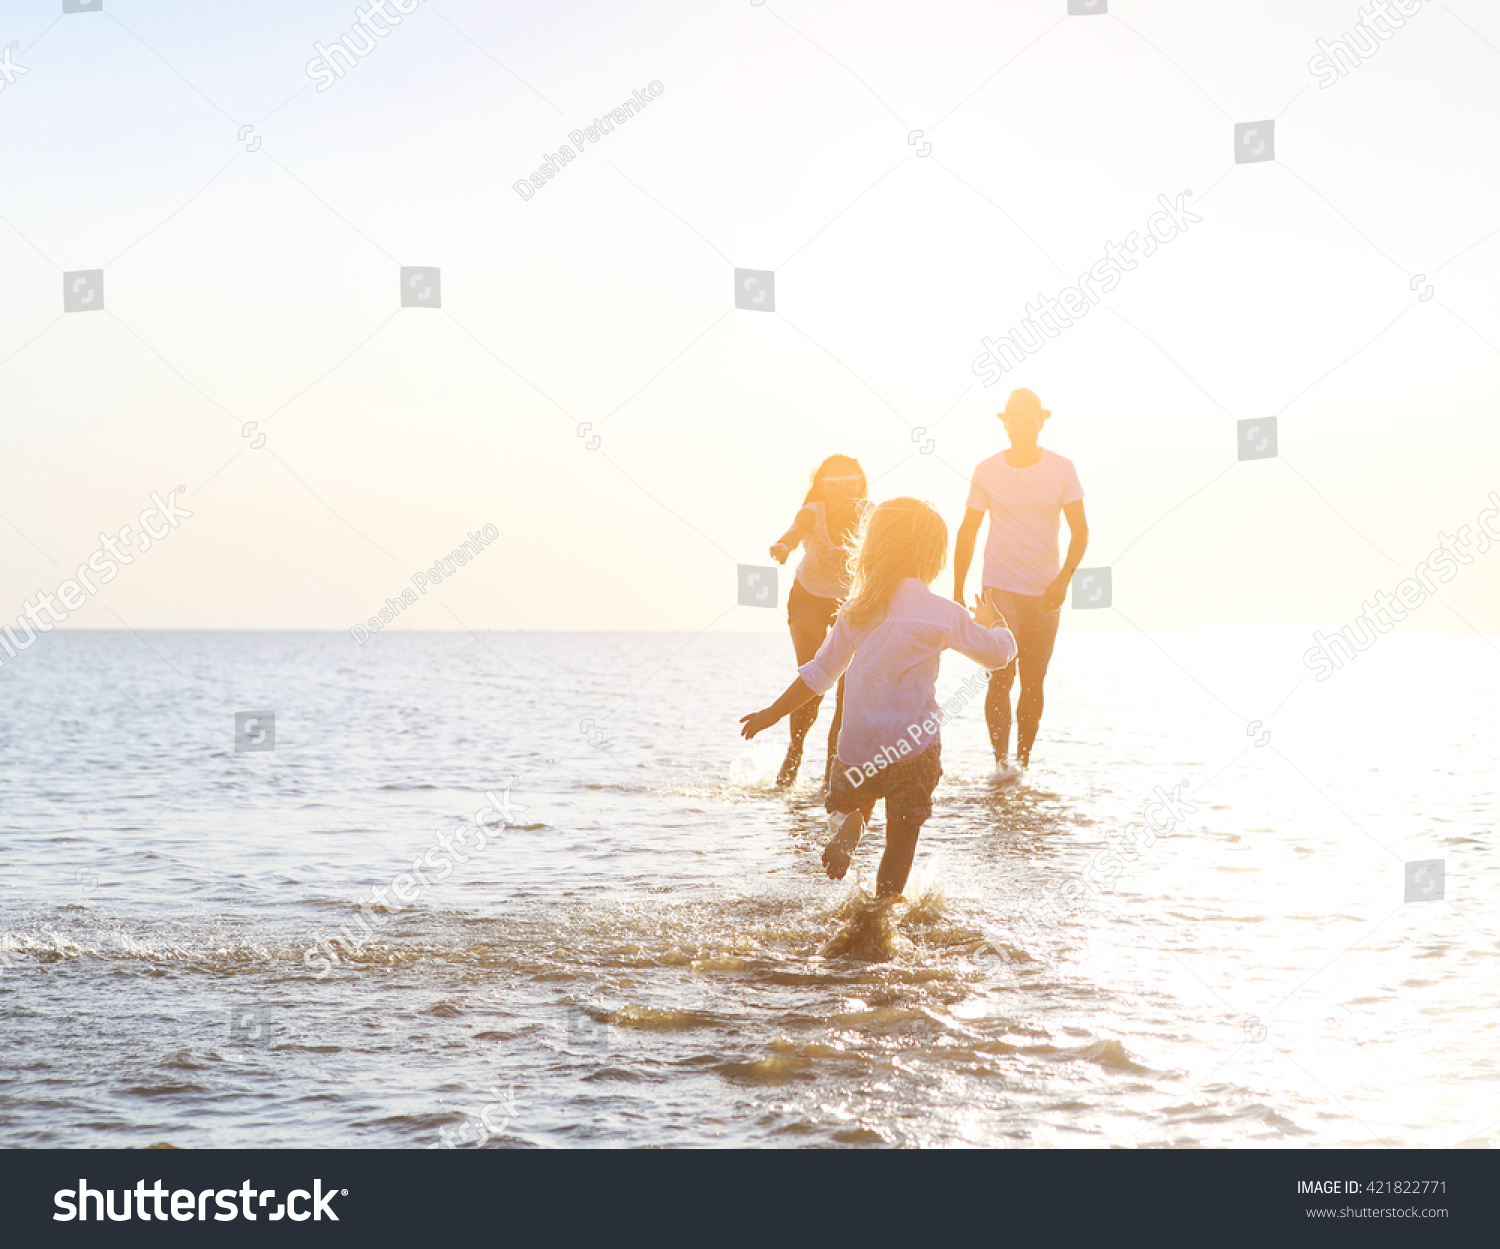 Happy young family having fun running on beach at sunset. Family traveling concept #421822771